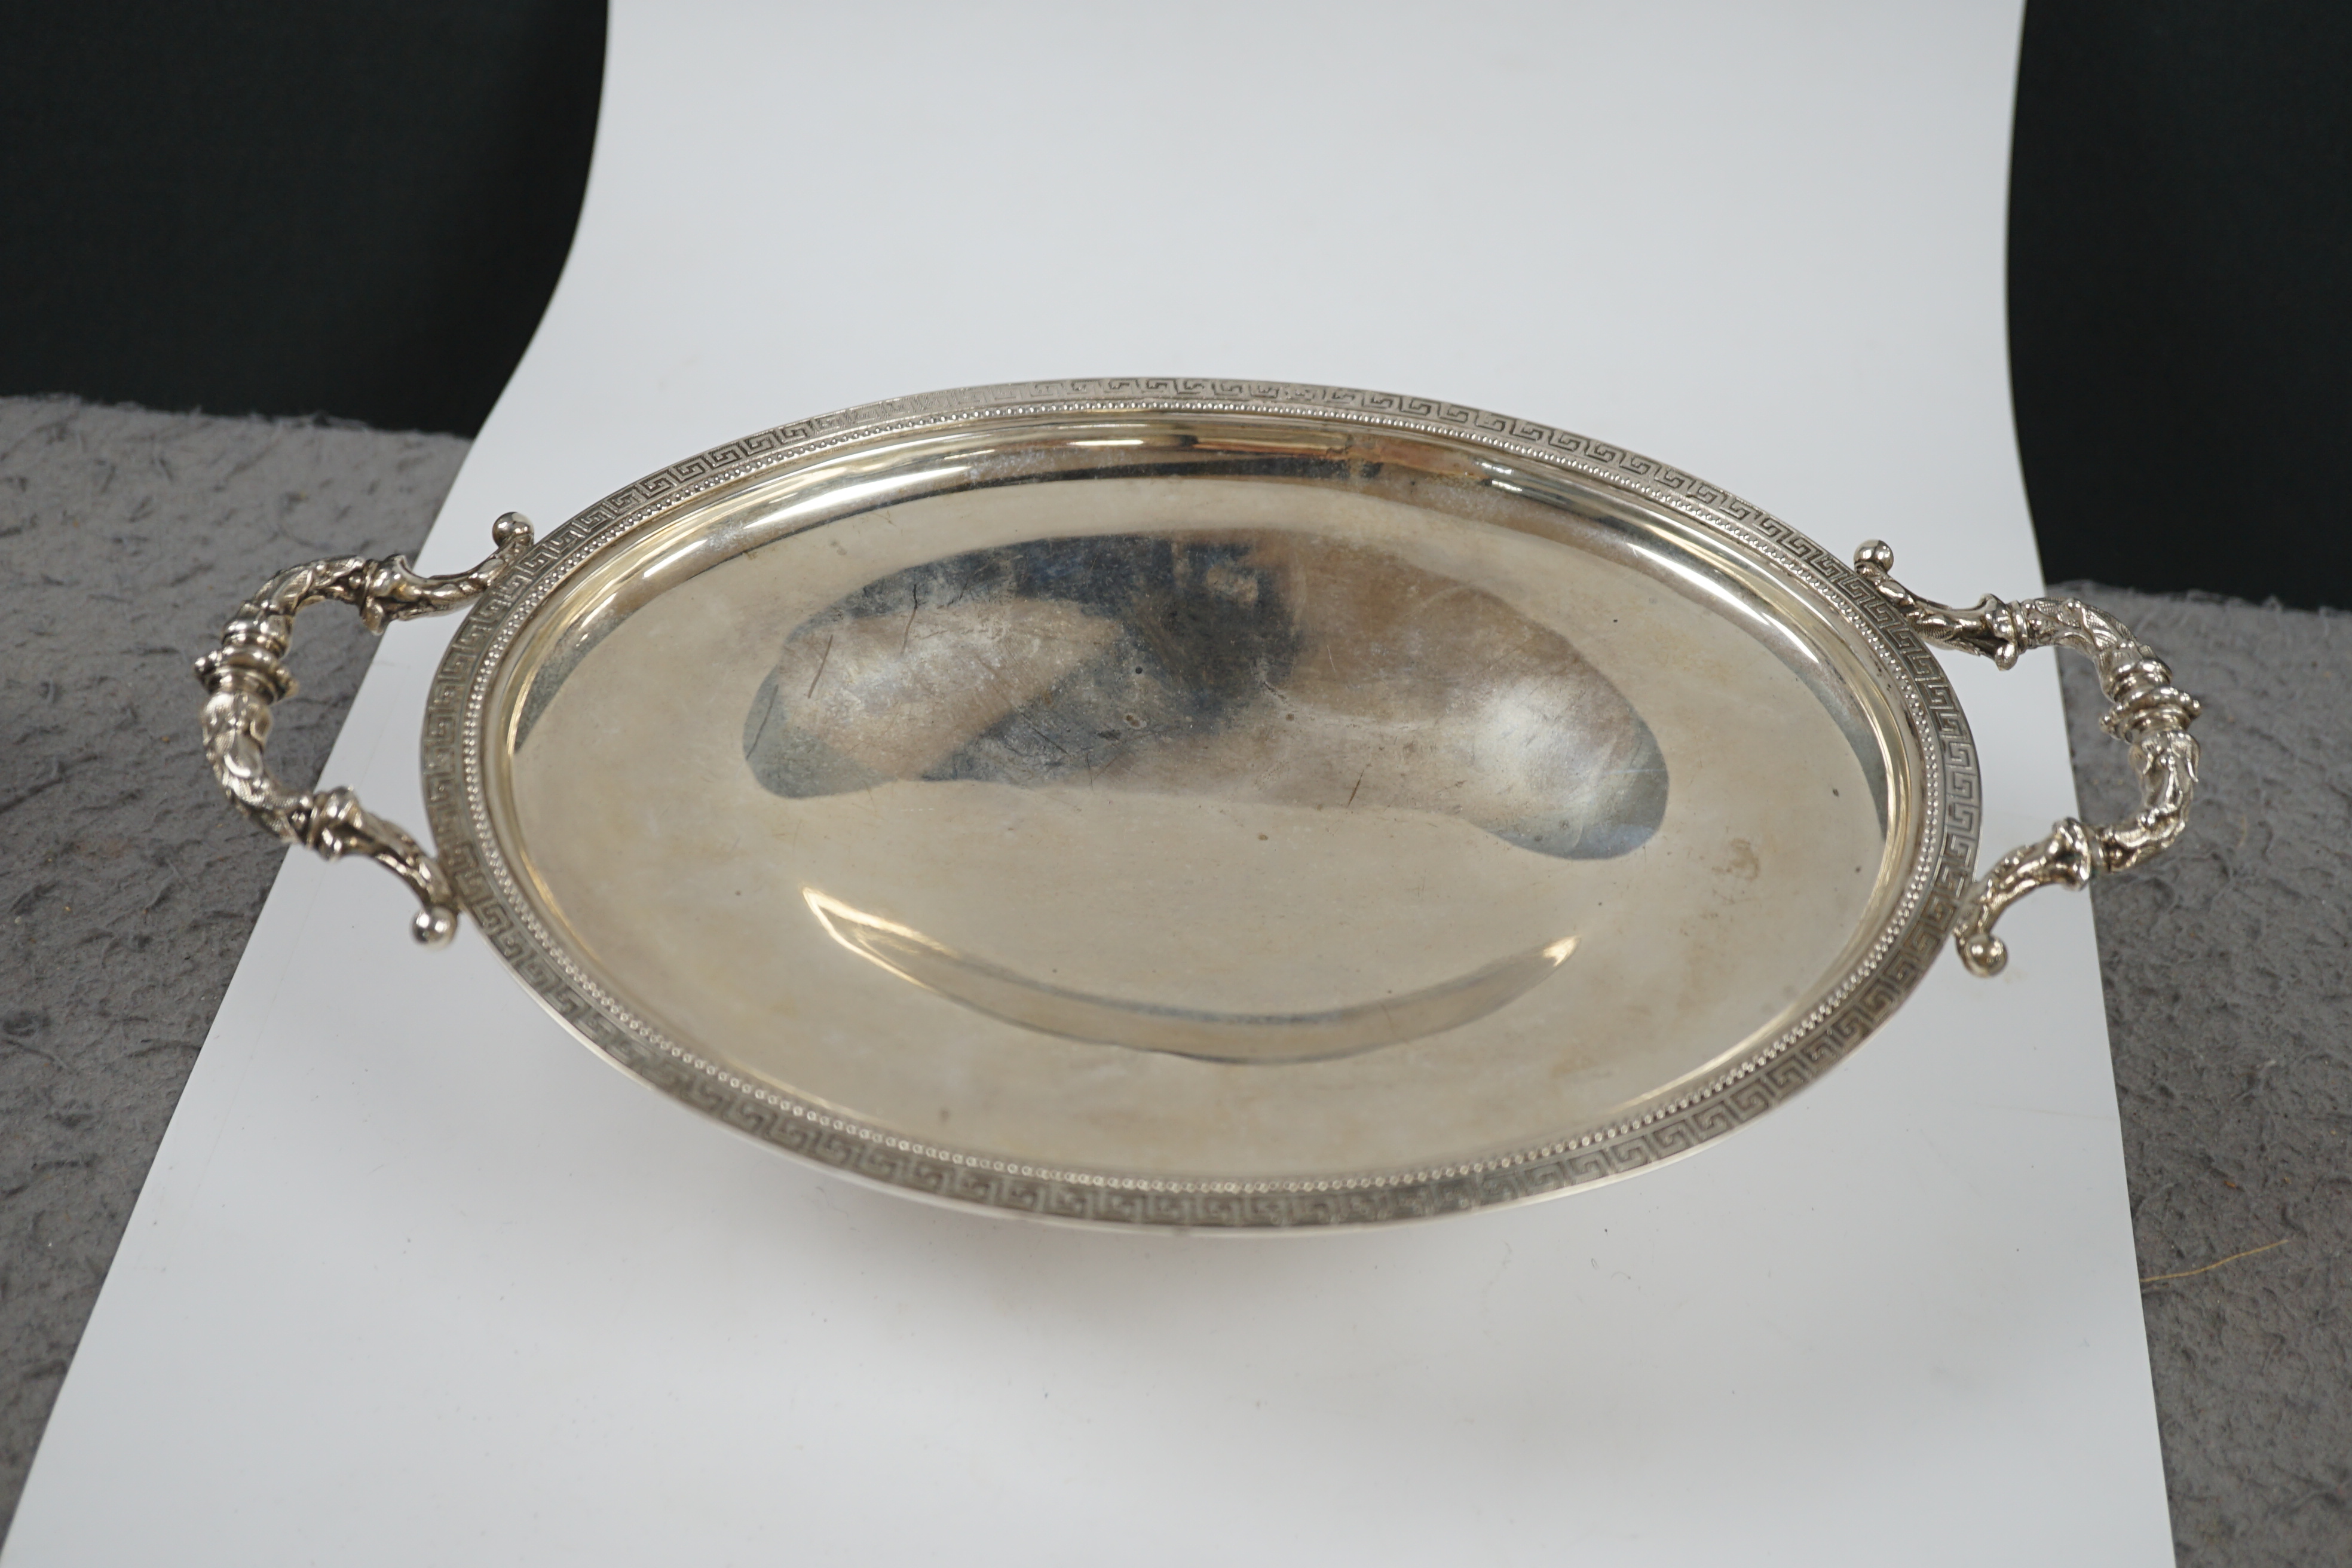 An American sterling two handled oval pedestal dish, 31.1cm over handles, 14.5oz. Condition - fair to good